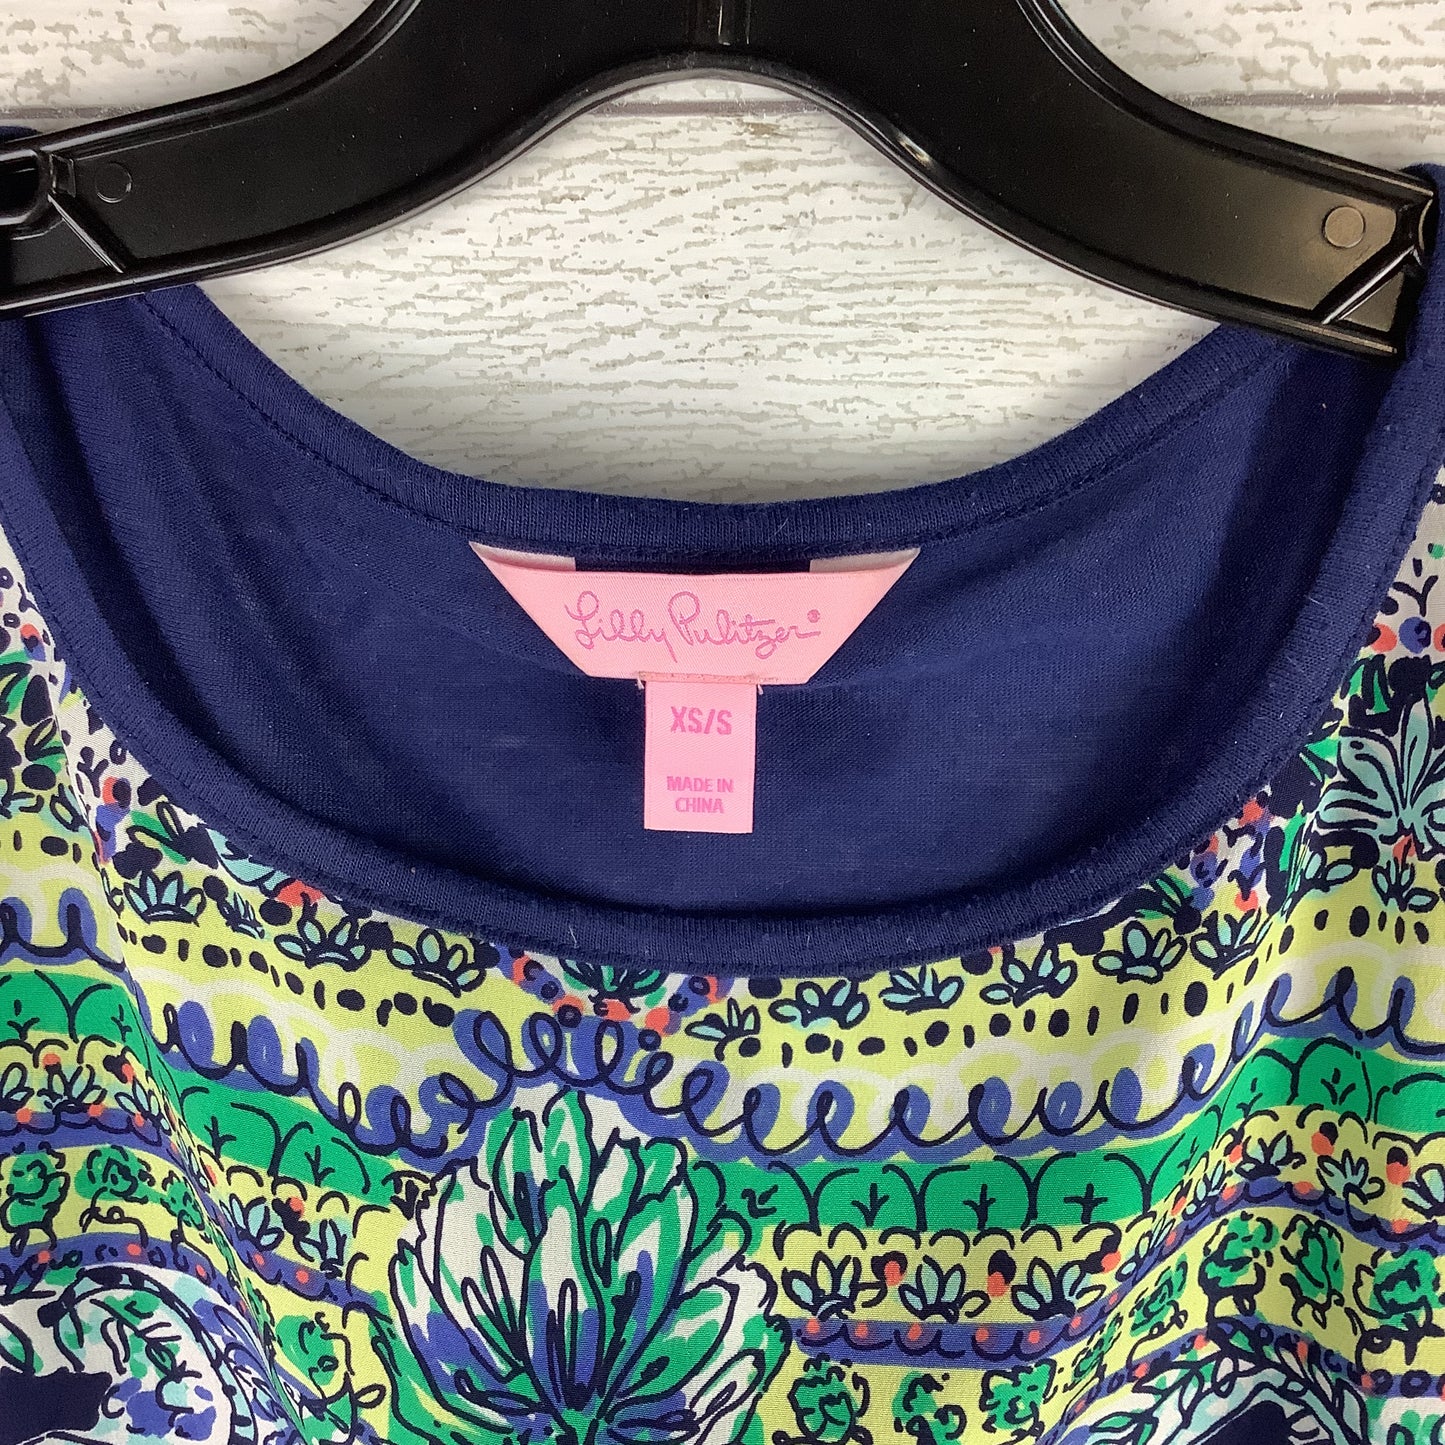 Top Short Sleeve By Lilly Pulitzer  Size: Xs